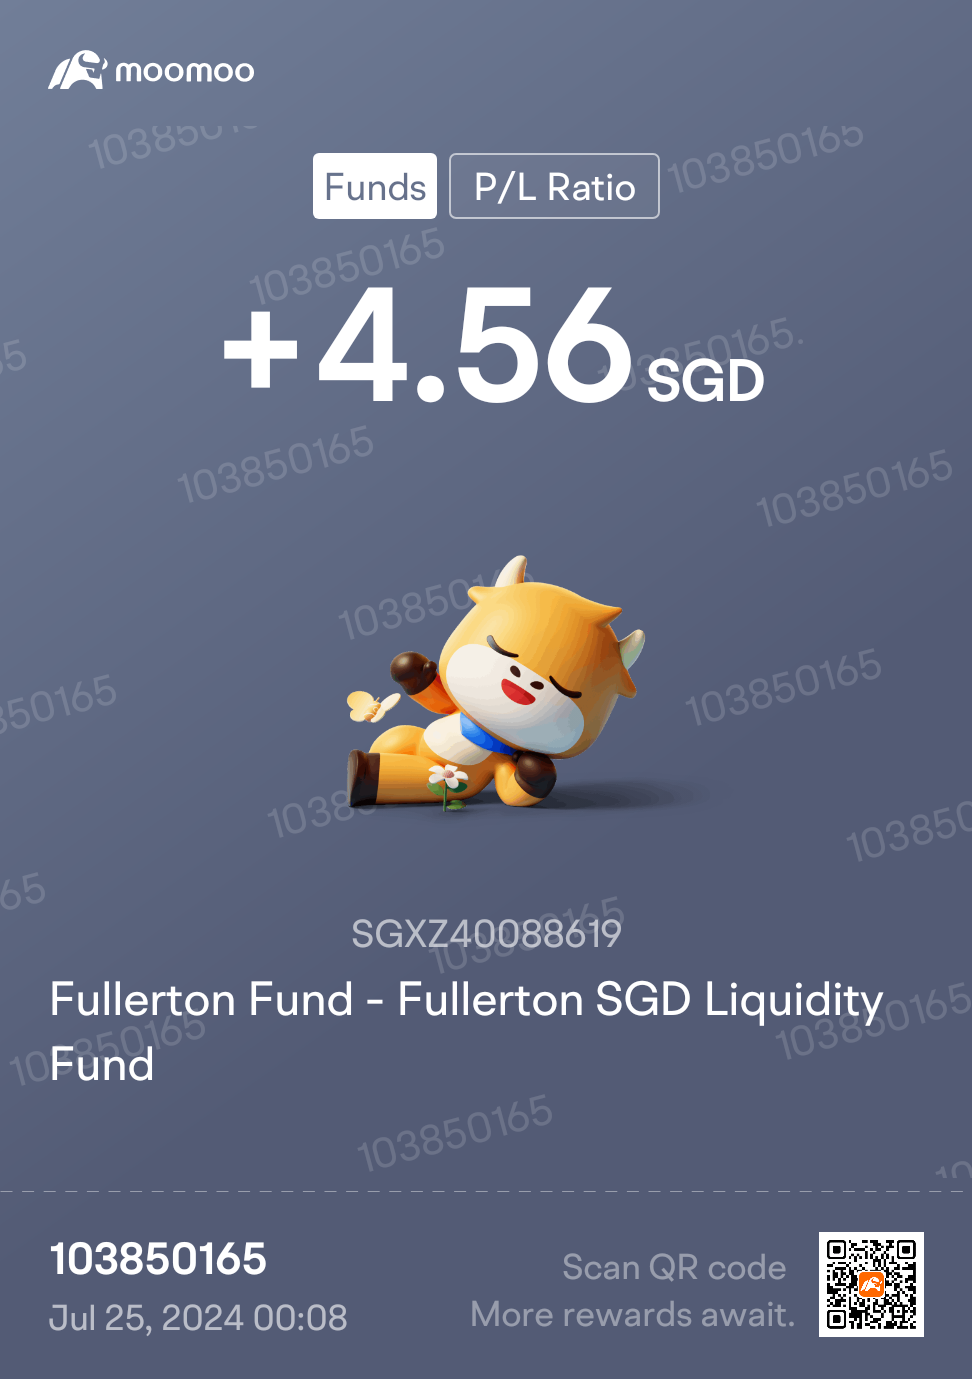 $Fullerton Fund - Fullerton SGD Liquidity Fund (SGXZ40088619.MF)$ so far so good 😊, best place to park my money here to earn high interest as a student that do...